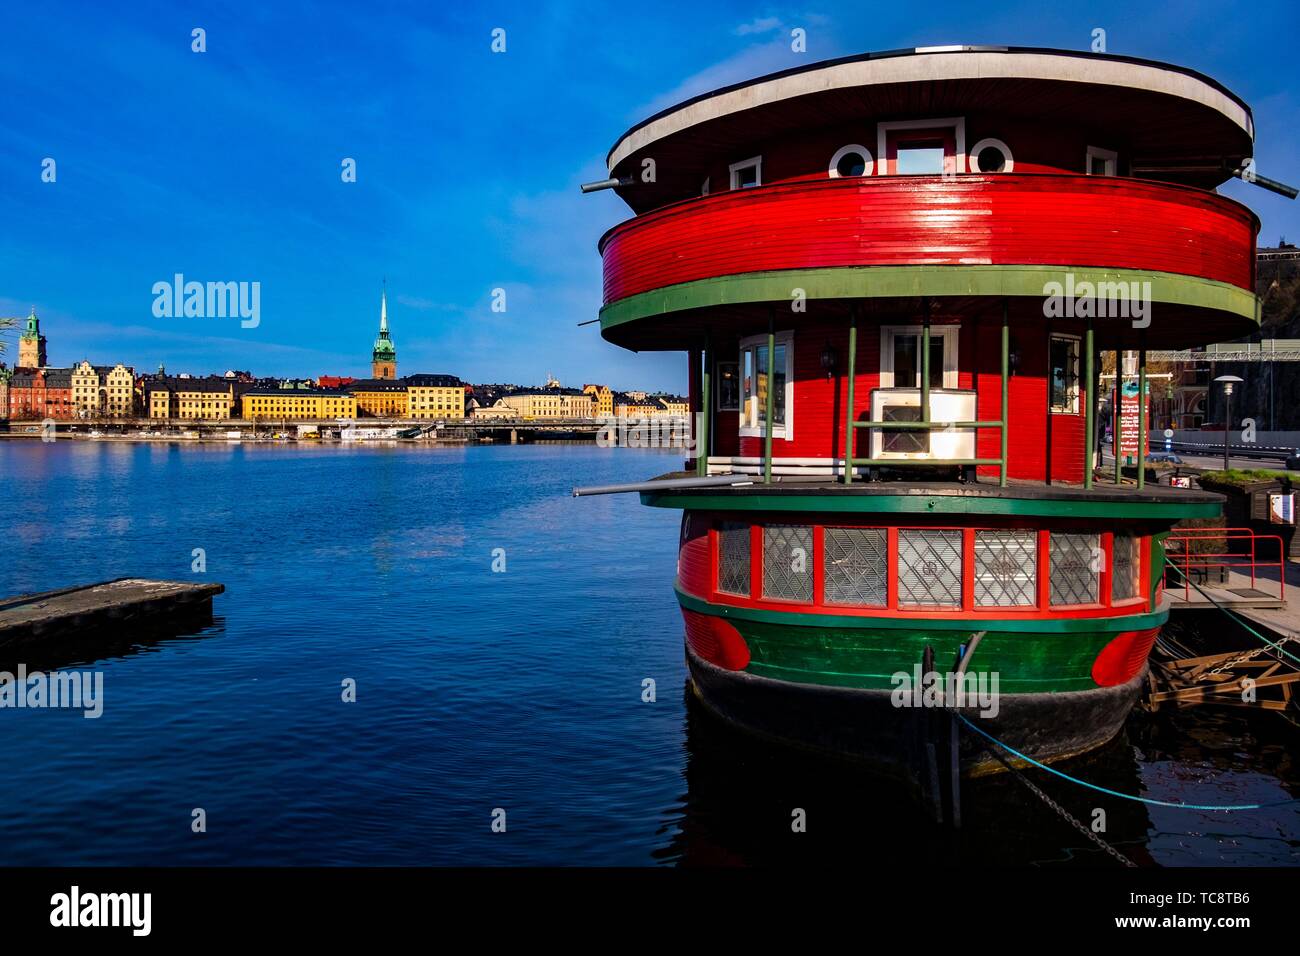 Exterior of the Red Boat in Stockholm, Sweden Stock Photo - Alamy